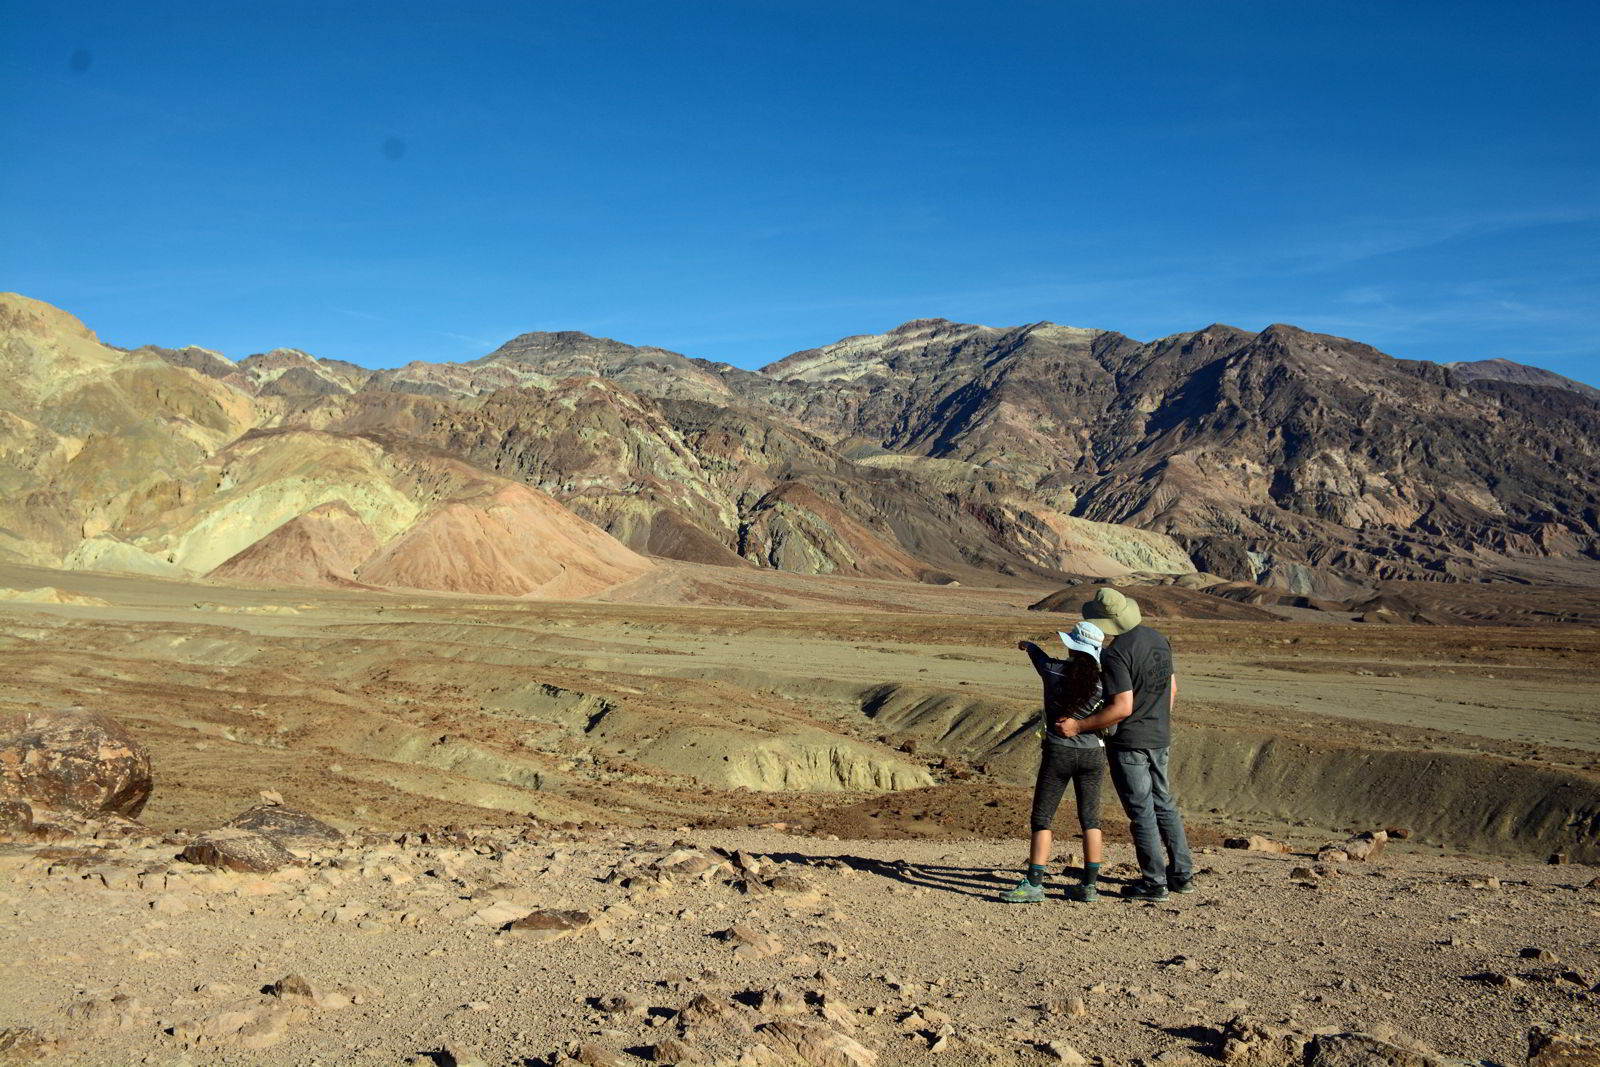 An image of a couple looking at the colors of the rock features at a point along the Artist's Drive in Death Valley National Park in California - Visiting Death Valley